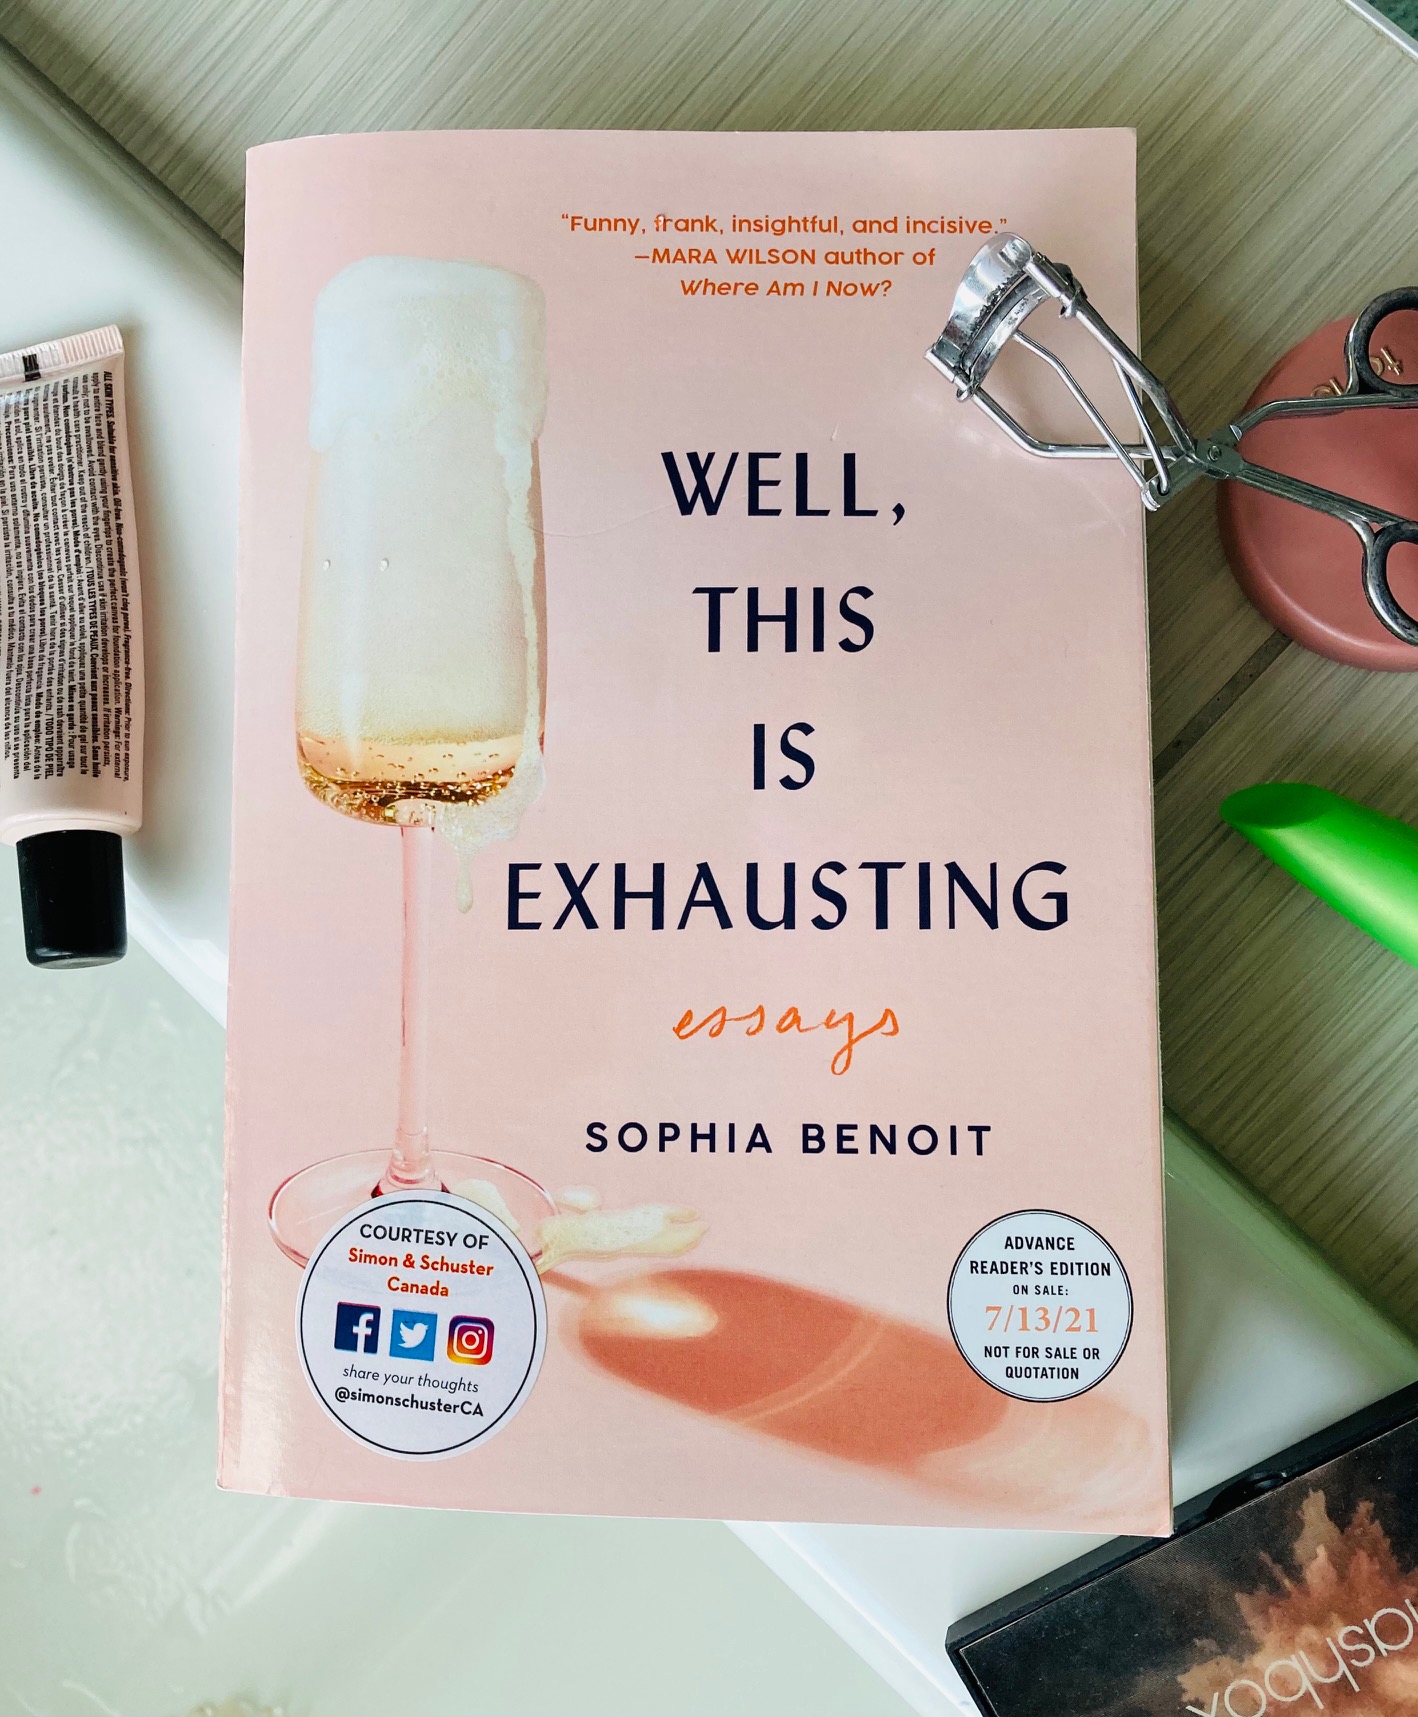 Well, This is Exhausting by Sophia Benoit book pictured with containers of makeup scattered around it